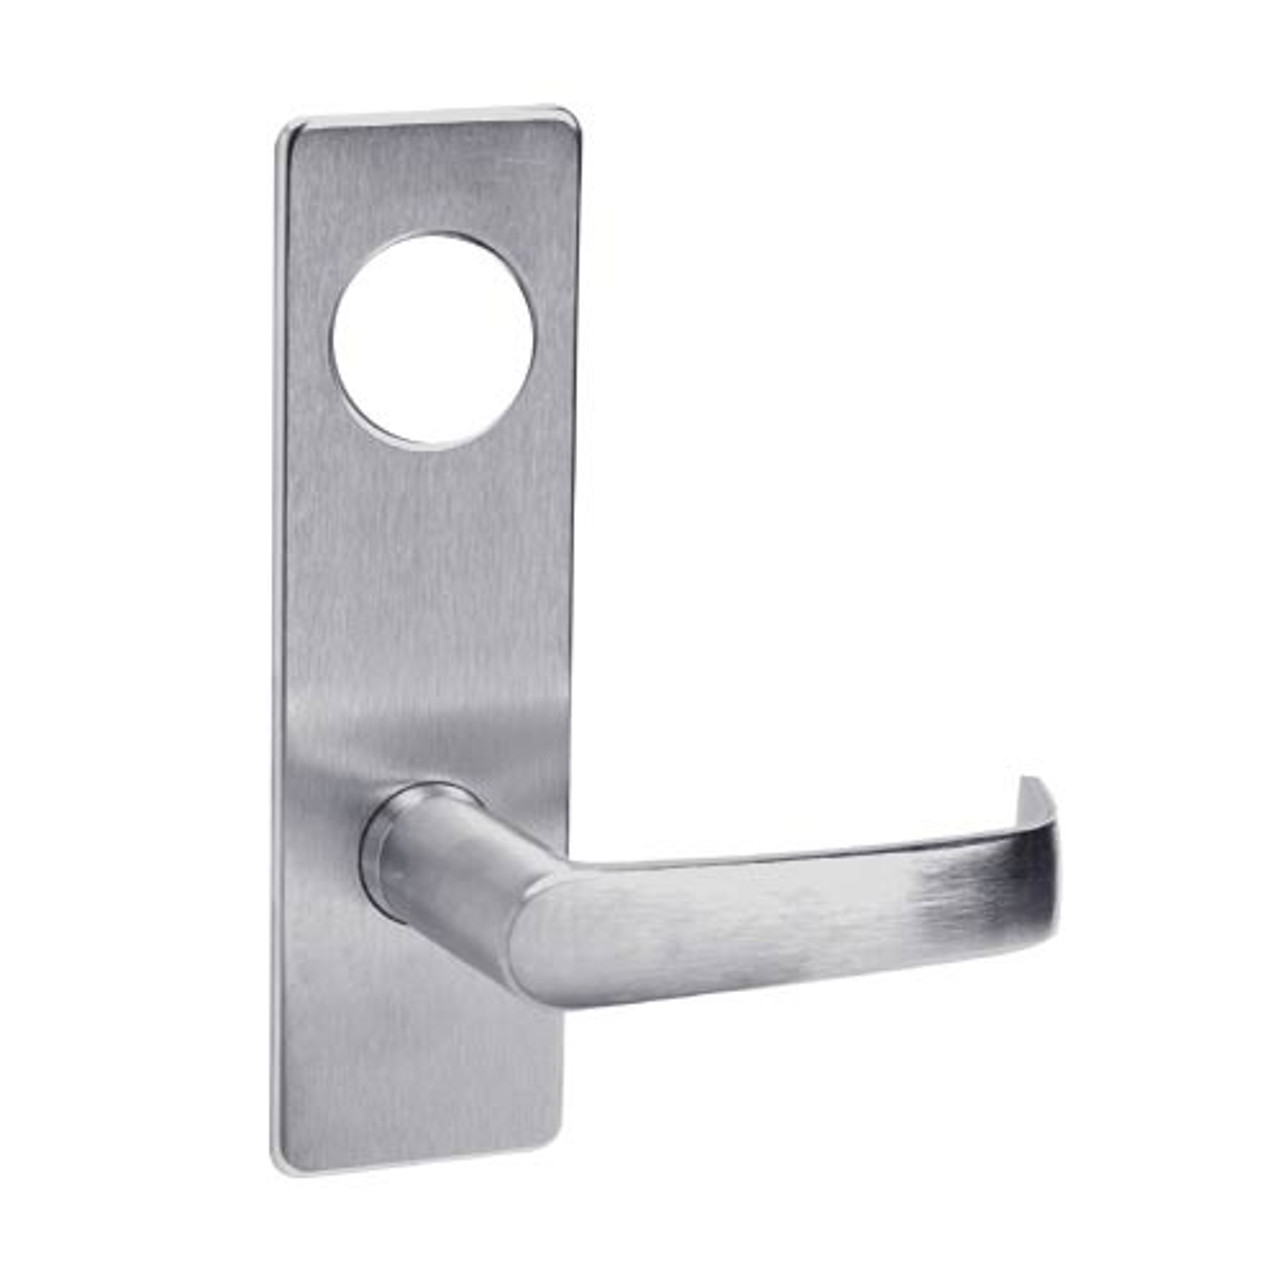 ML2058-NSM-626-CL7 Corbin Russwin ML2000 Series IC 7-Pin Less Core Mortise Entrance Holdback Locksets with Newport Lever in Satin Chrome